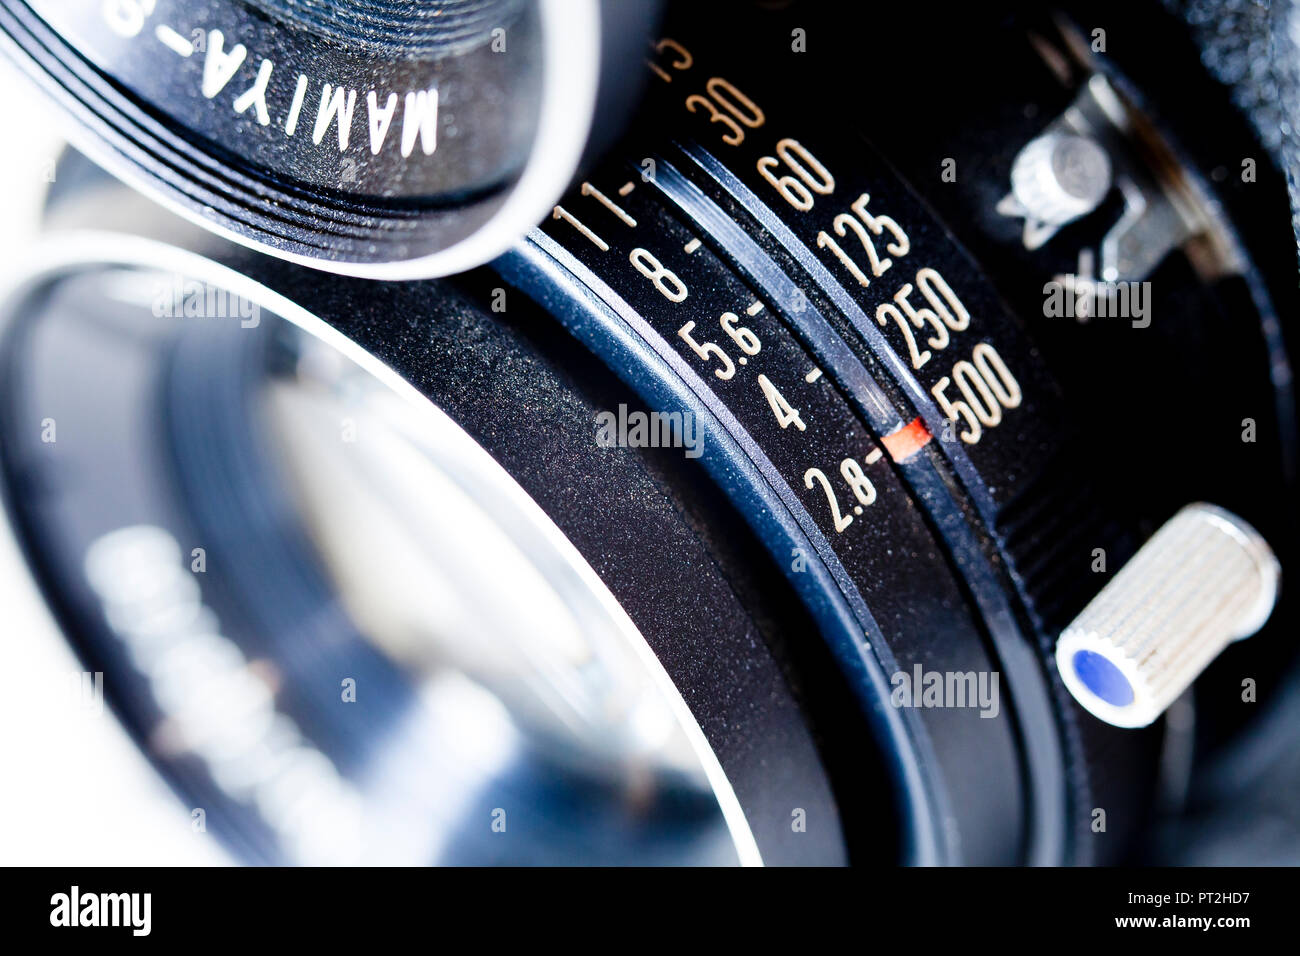 Vintage Mamiya C220 Professional twin lens reflex camera (TLR camera), close up of f stop and shutter speed dial, circa 1970s Stock Photo